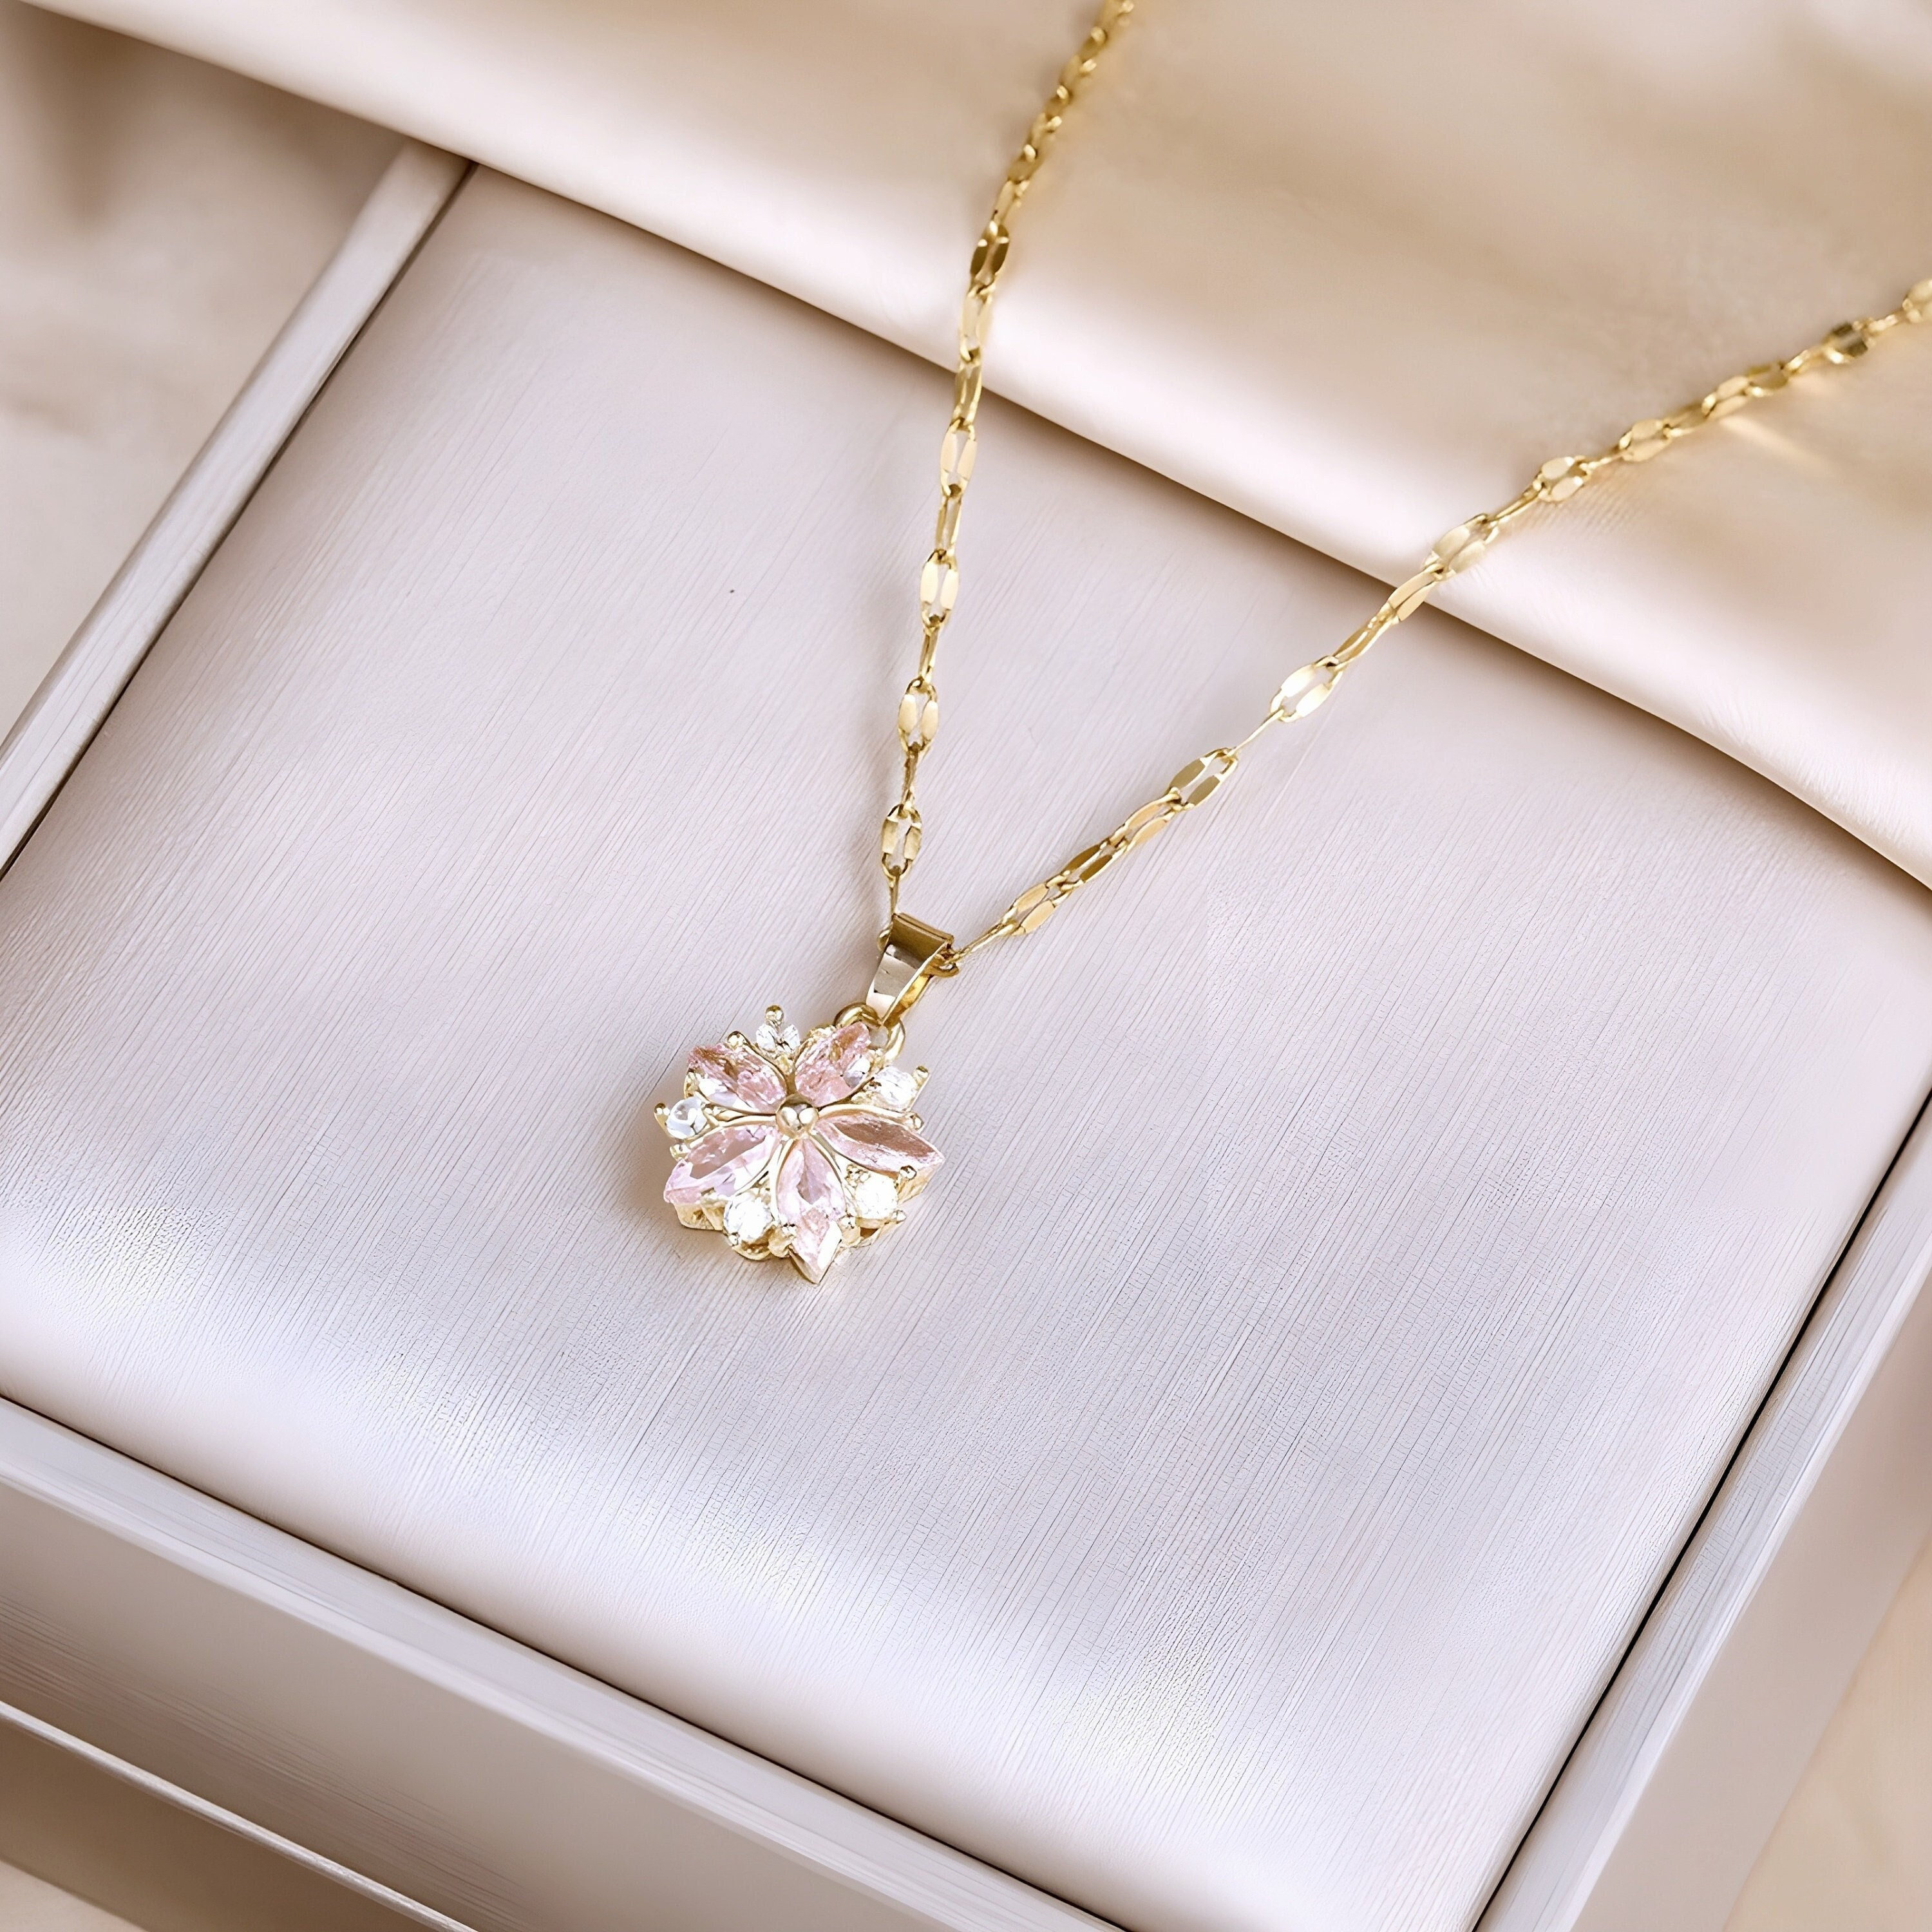 Compare prices for Color Blossom Necklace, Pink Gold, Pink Mother